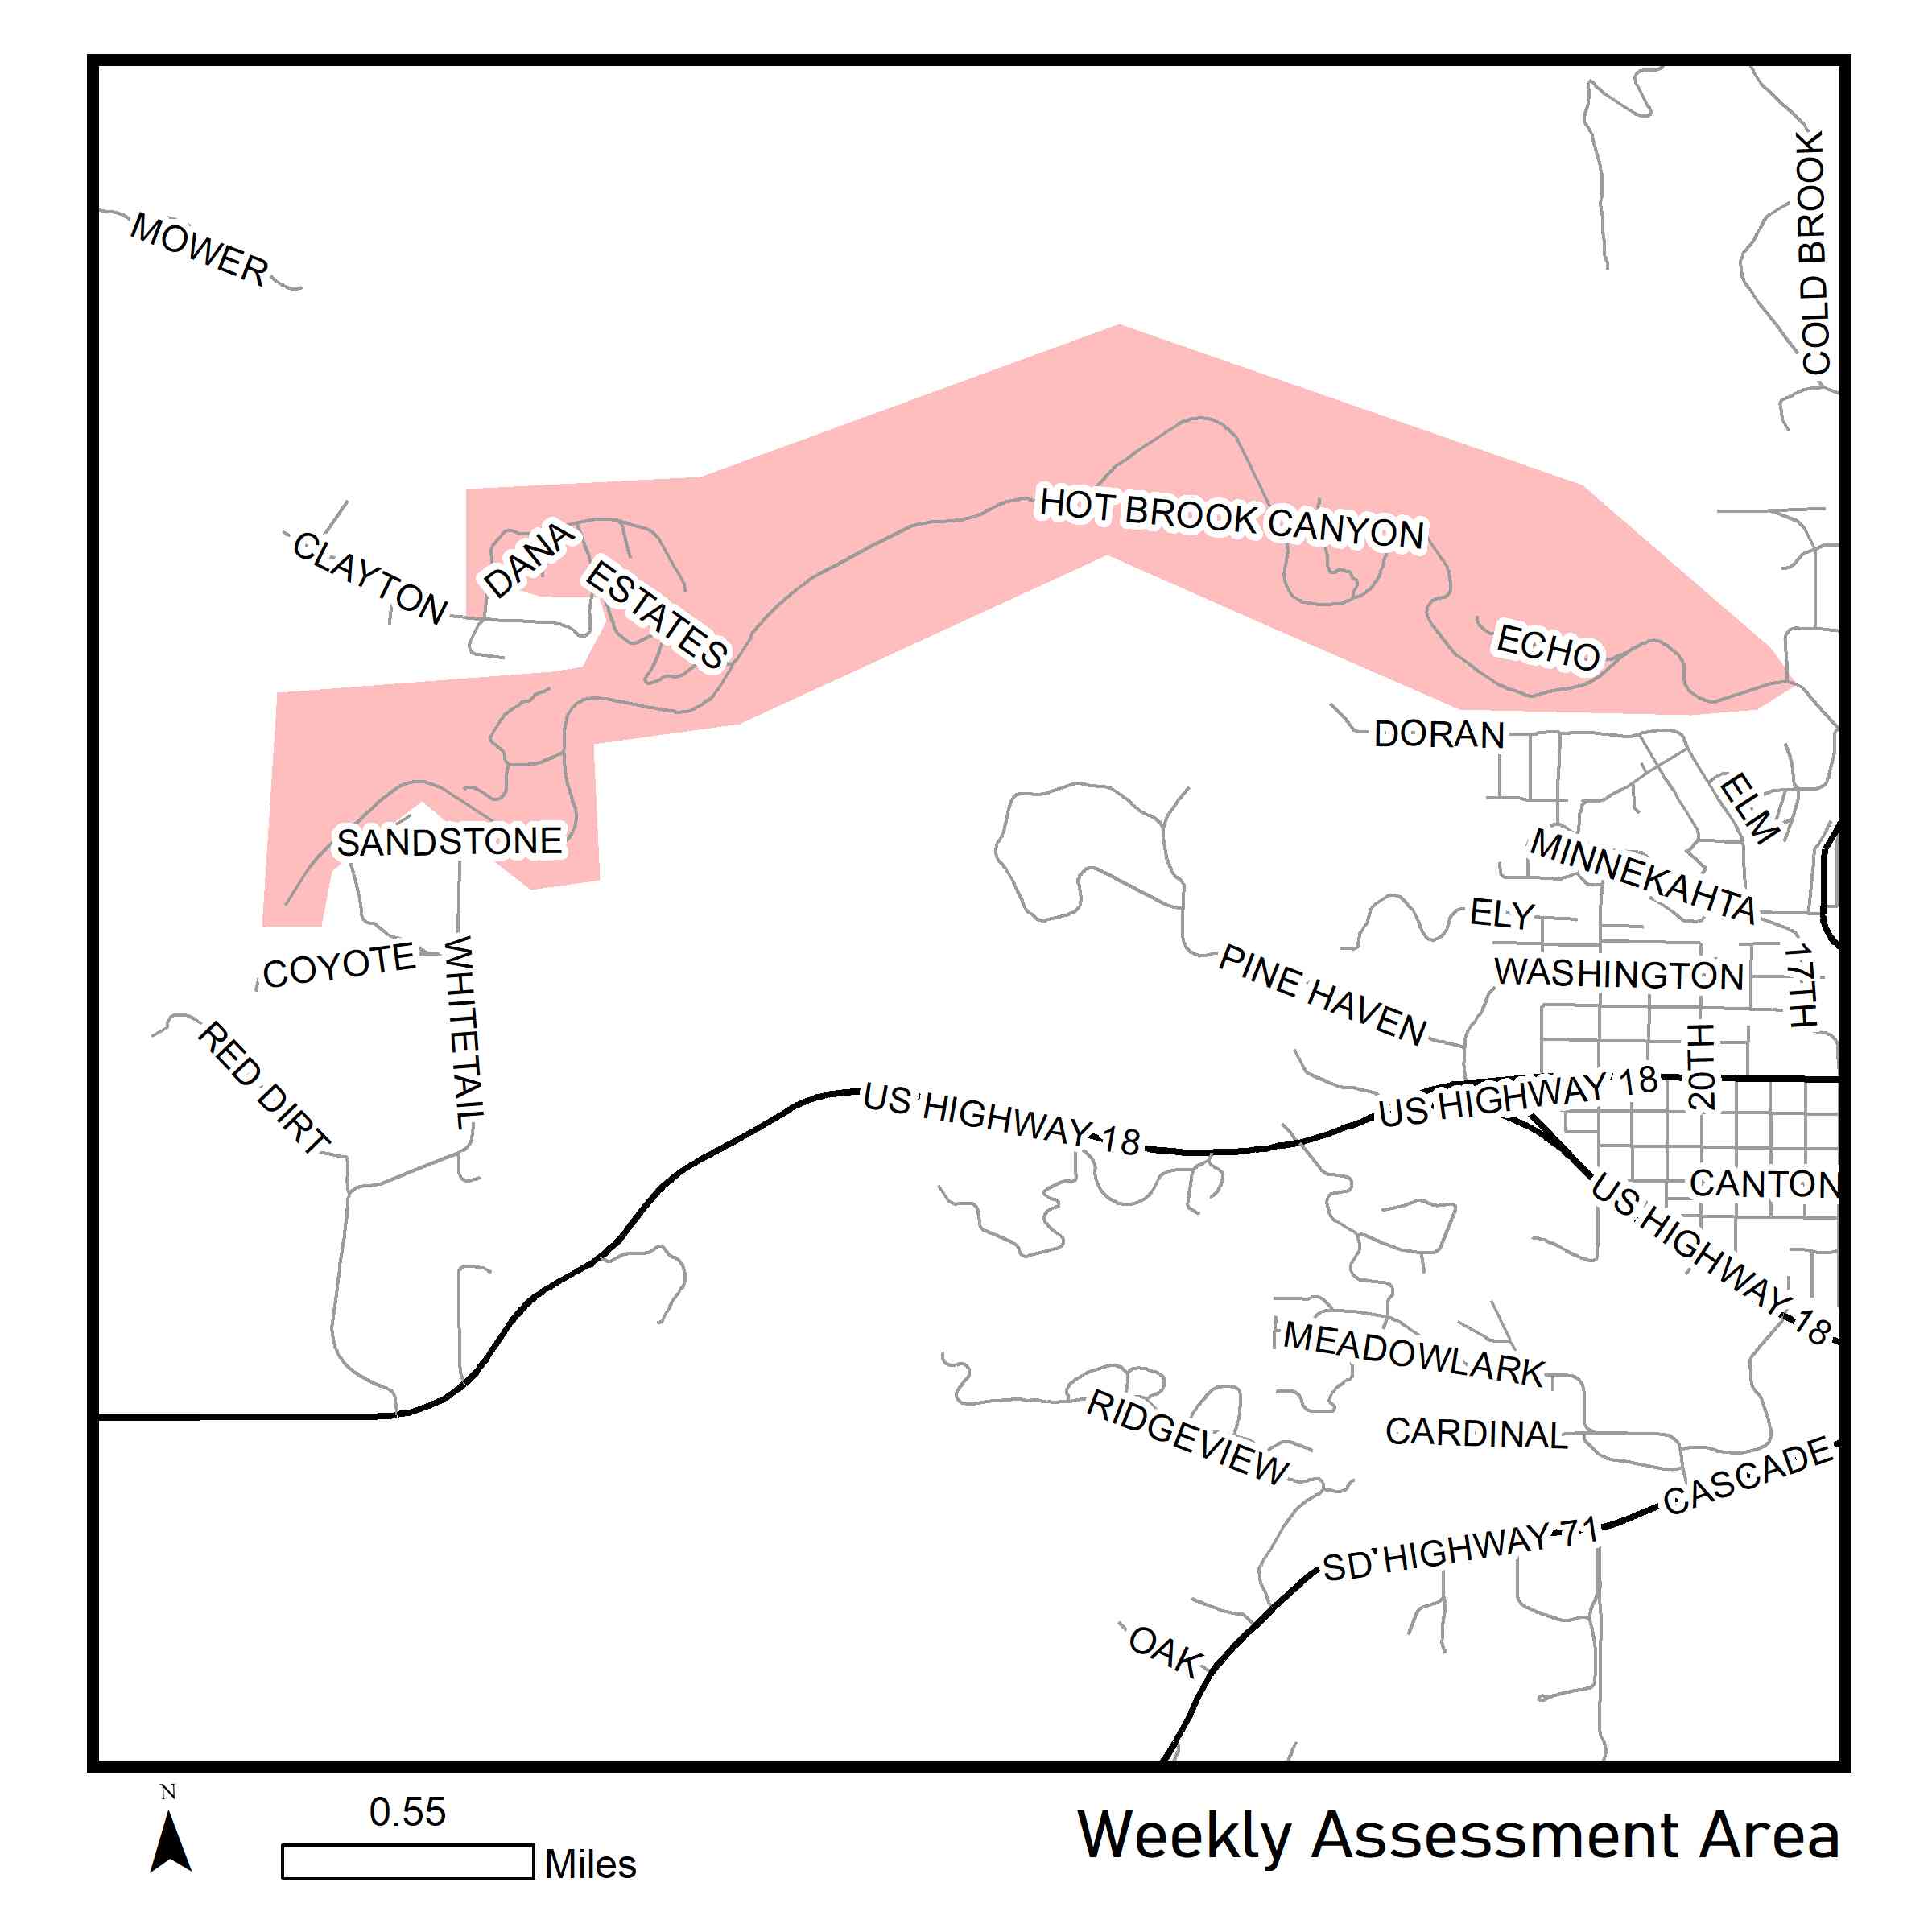 Map of reassessment area for week of July 6th 2020